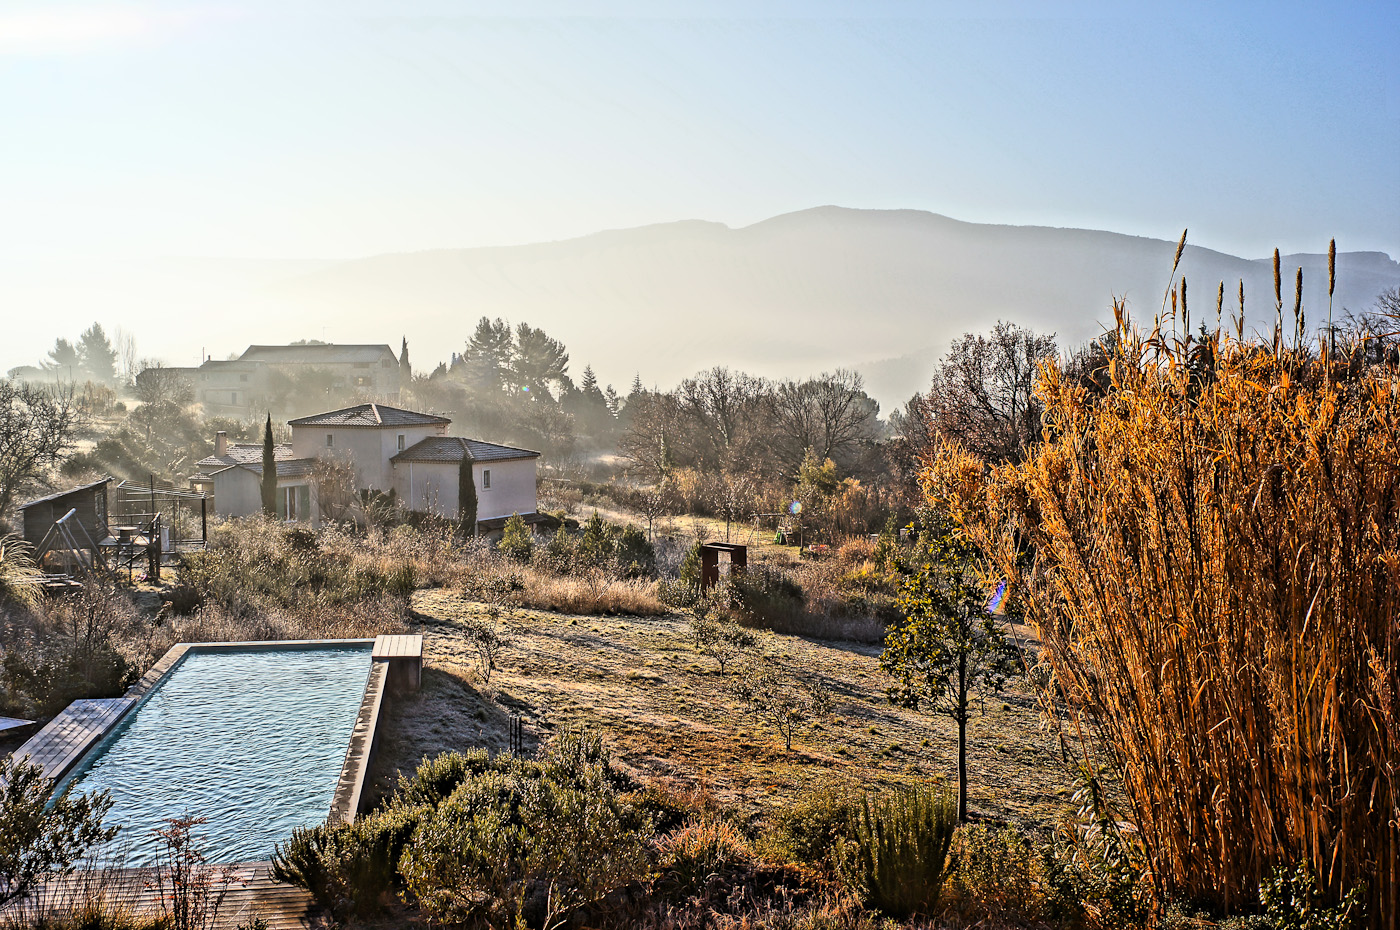 A sunrise over the hills in Provence, HDR Painting HIGH mode. Sony NEX-5N and Zeiss ZM Biogon 25/2.8